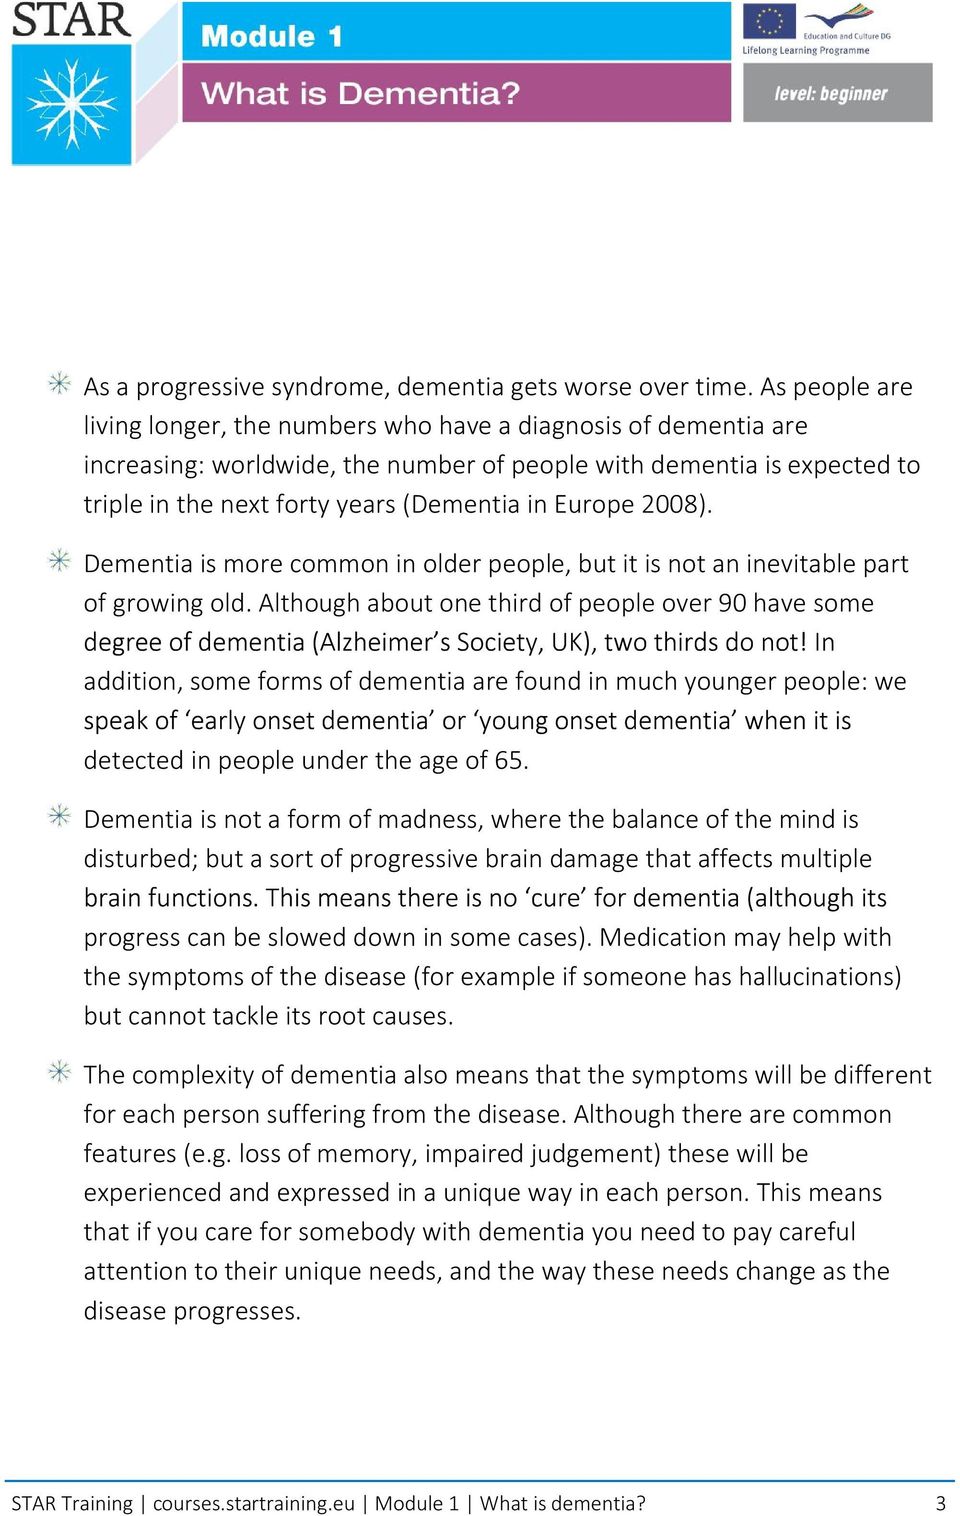 Europe 2008). Dementia is more common in older people, but it is not an inevitable part of growing old.